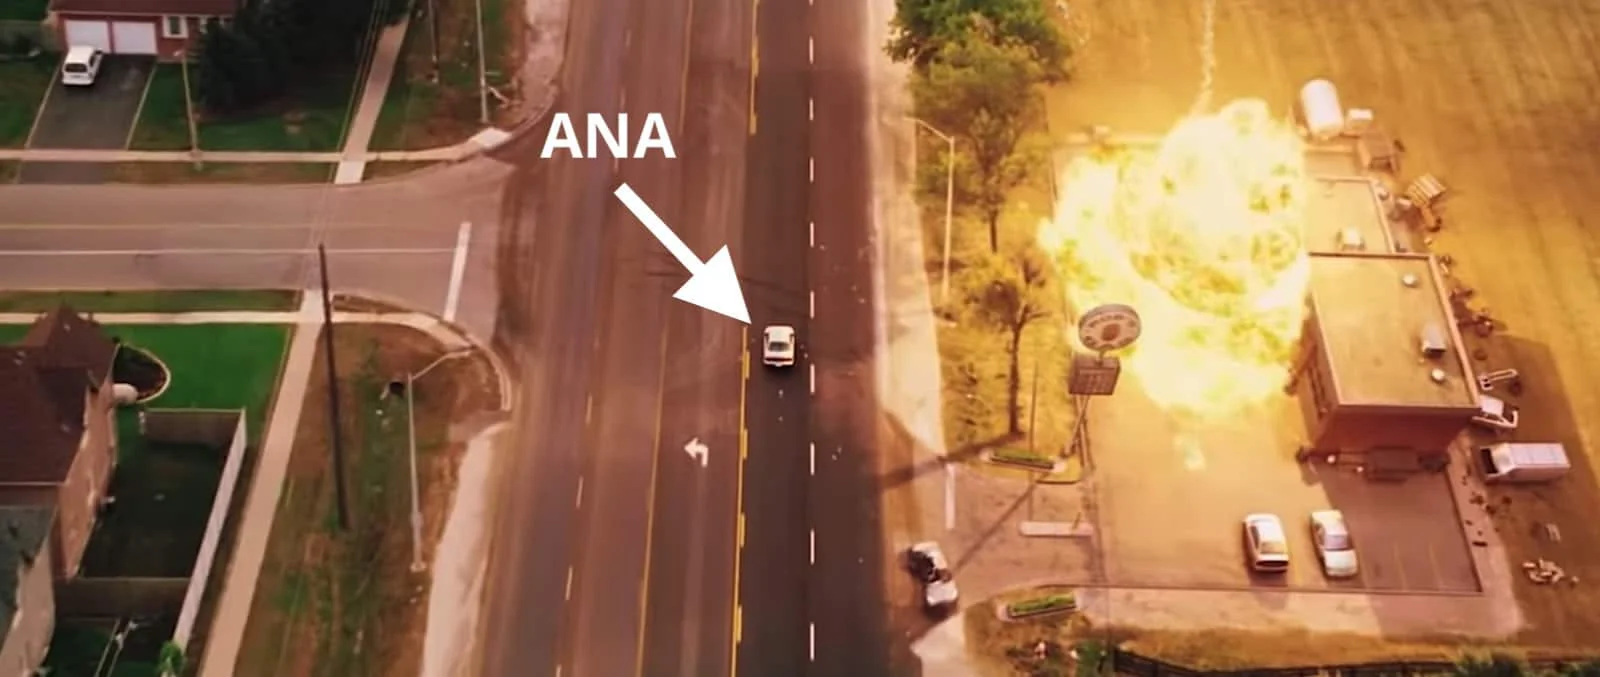 Aerial Shot - Camera Angles and Movement - Car Explosion Shot - Dawn of the Dead